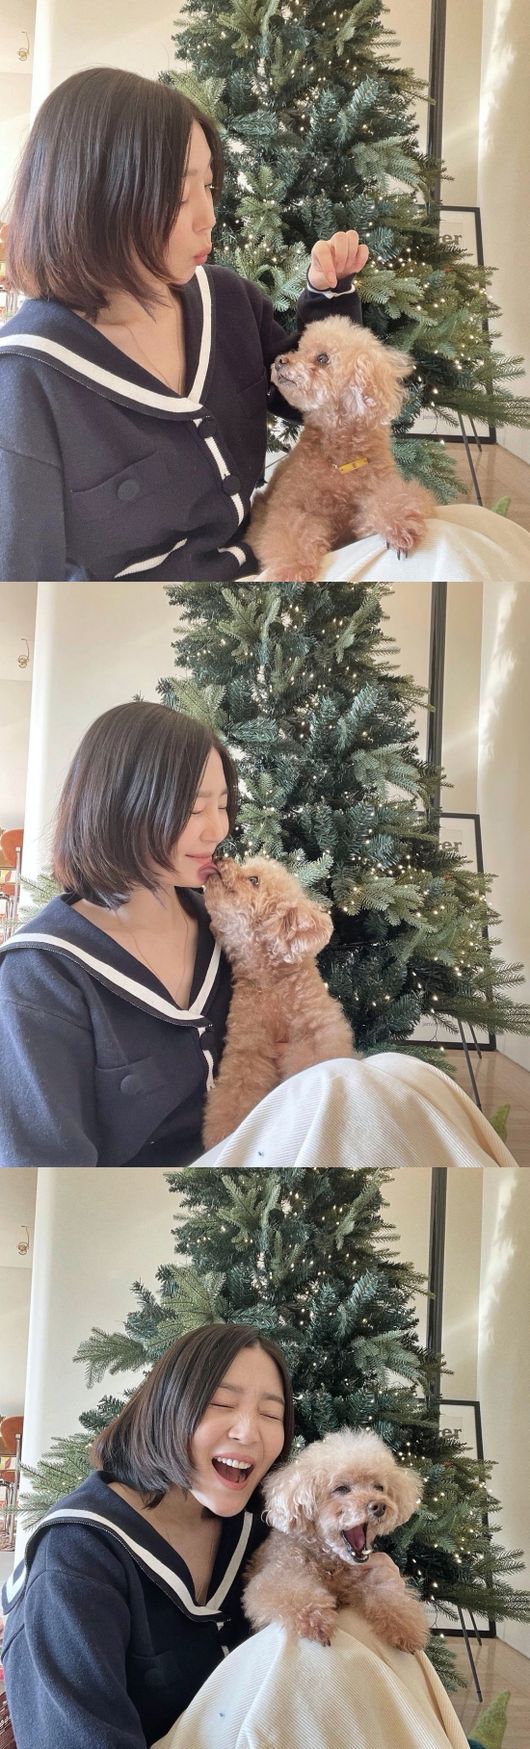 Actor Shin Da-eun shares lovely routine with pet dogShin Da-eun wrote on her personal Instagram account on Thursday, Spring is about to turn 15. Its the most important thing to eat as an old dog.We will welcome the spring of next year in health. Shin Da-eun in the public photo is making a happy face with a dog spring in front of the Christmas tree.Spring also kisses Shin Da-eun or smiles wide and reveals deep love and attracts attention.In particular, Shin Da-eun, who recently announced the news of pregnancy, is making a happier expression than before, and a smile is built on the appearance of these loving family.Meanwhile, Shin Da-eun marriages with architectural designer Lim Sung Bin in 2016.Shin Da-eun SNS